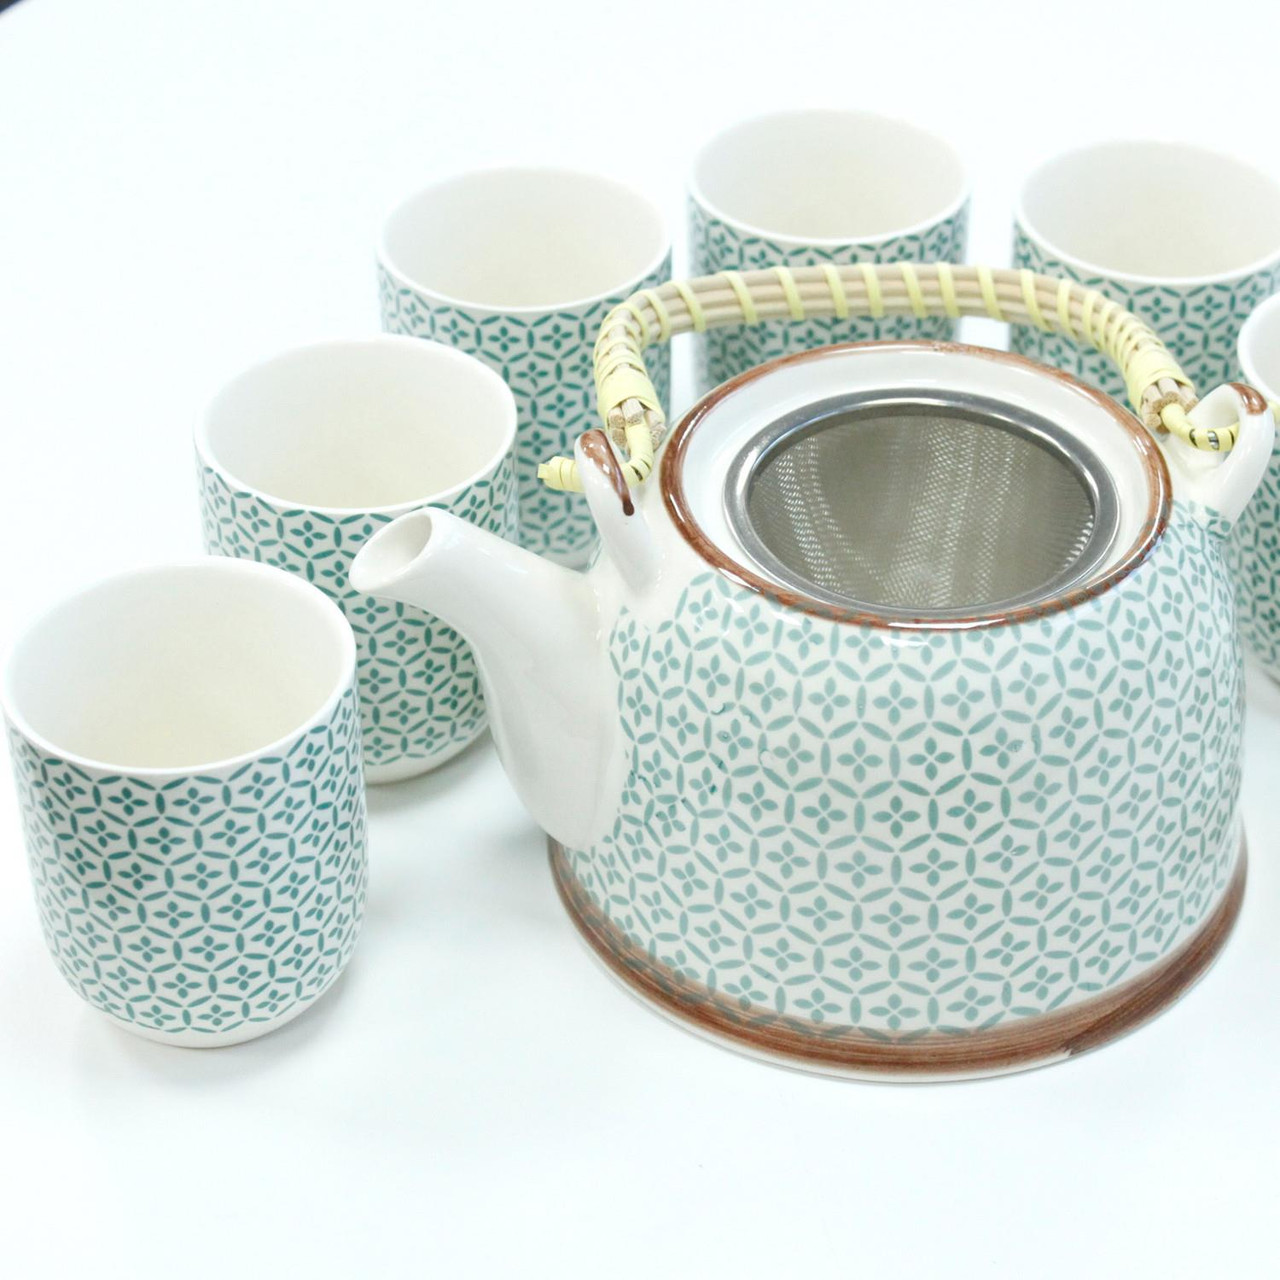 Chinese Herbal Tea Set - Green Mosaic Pattern - 6 Cups and Infuser - Boxed